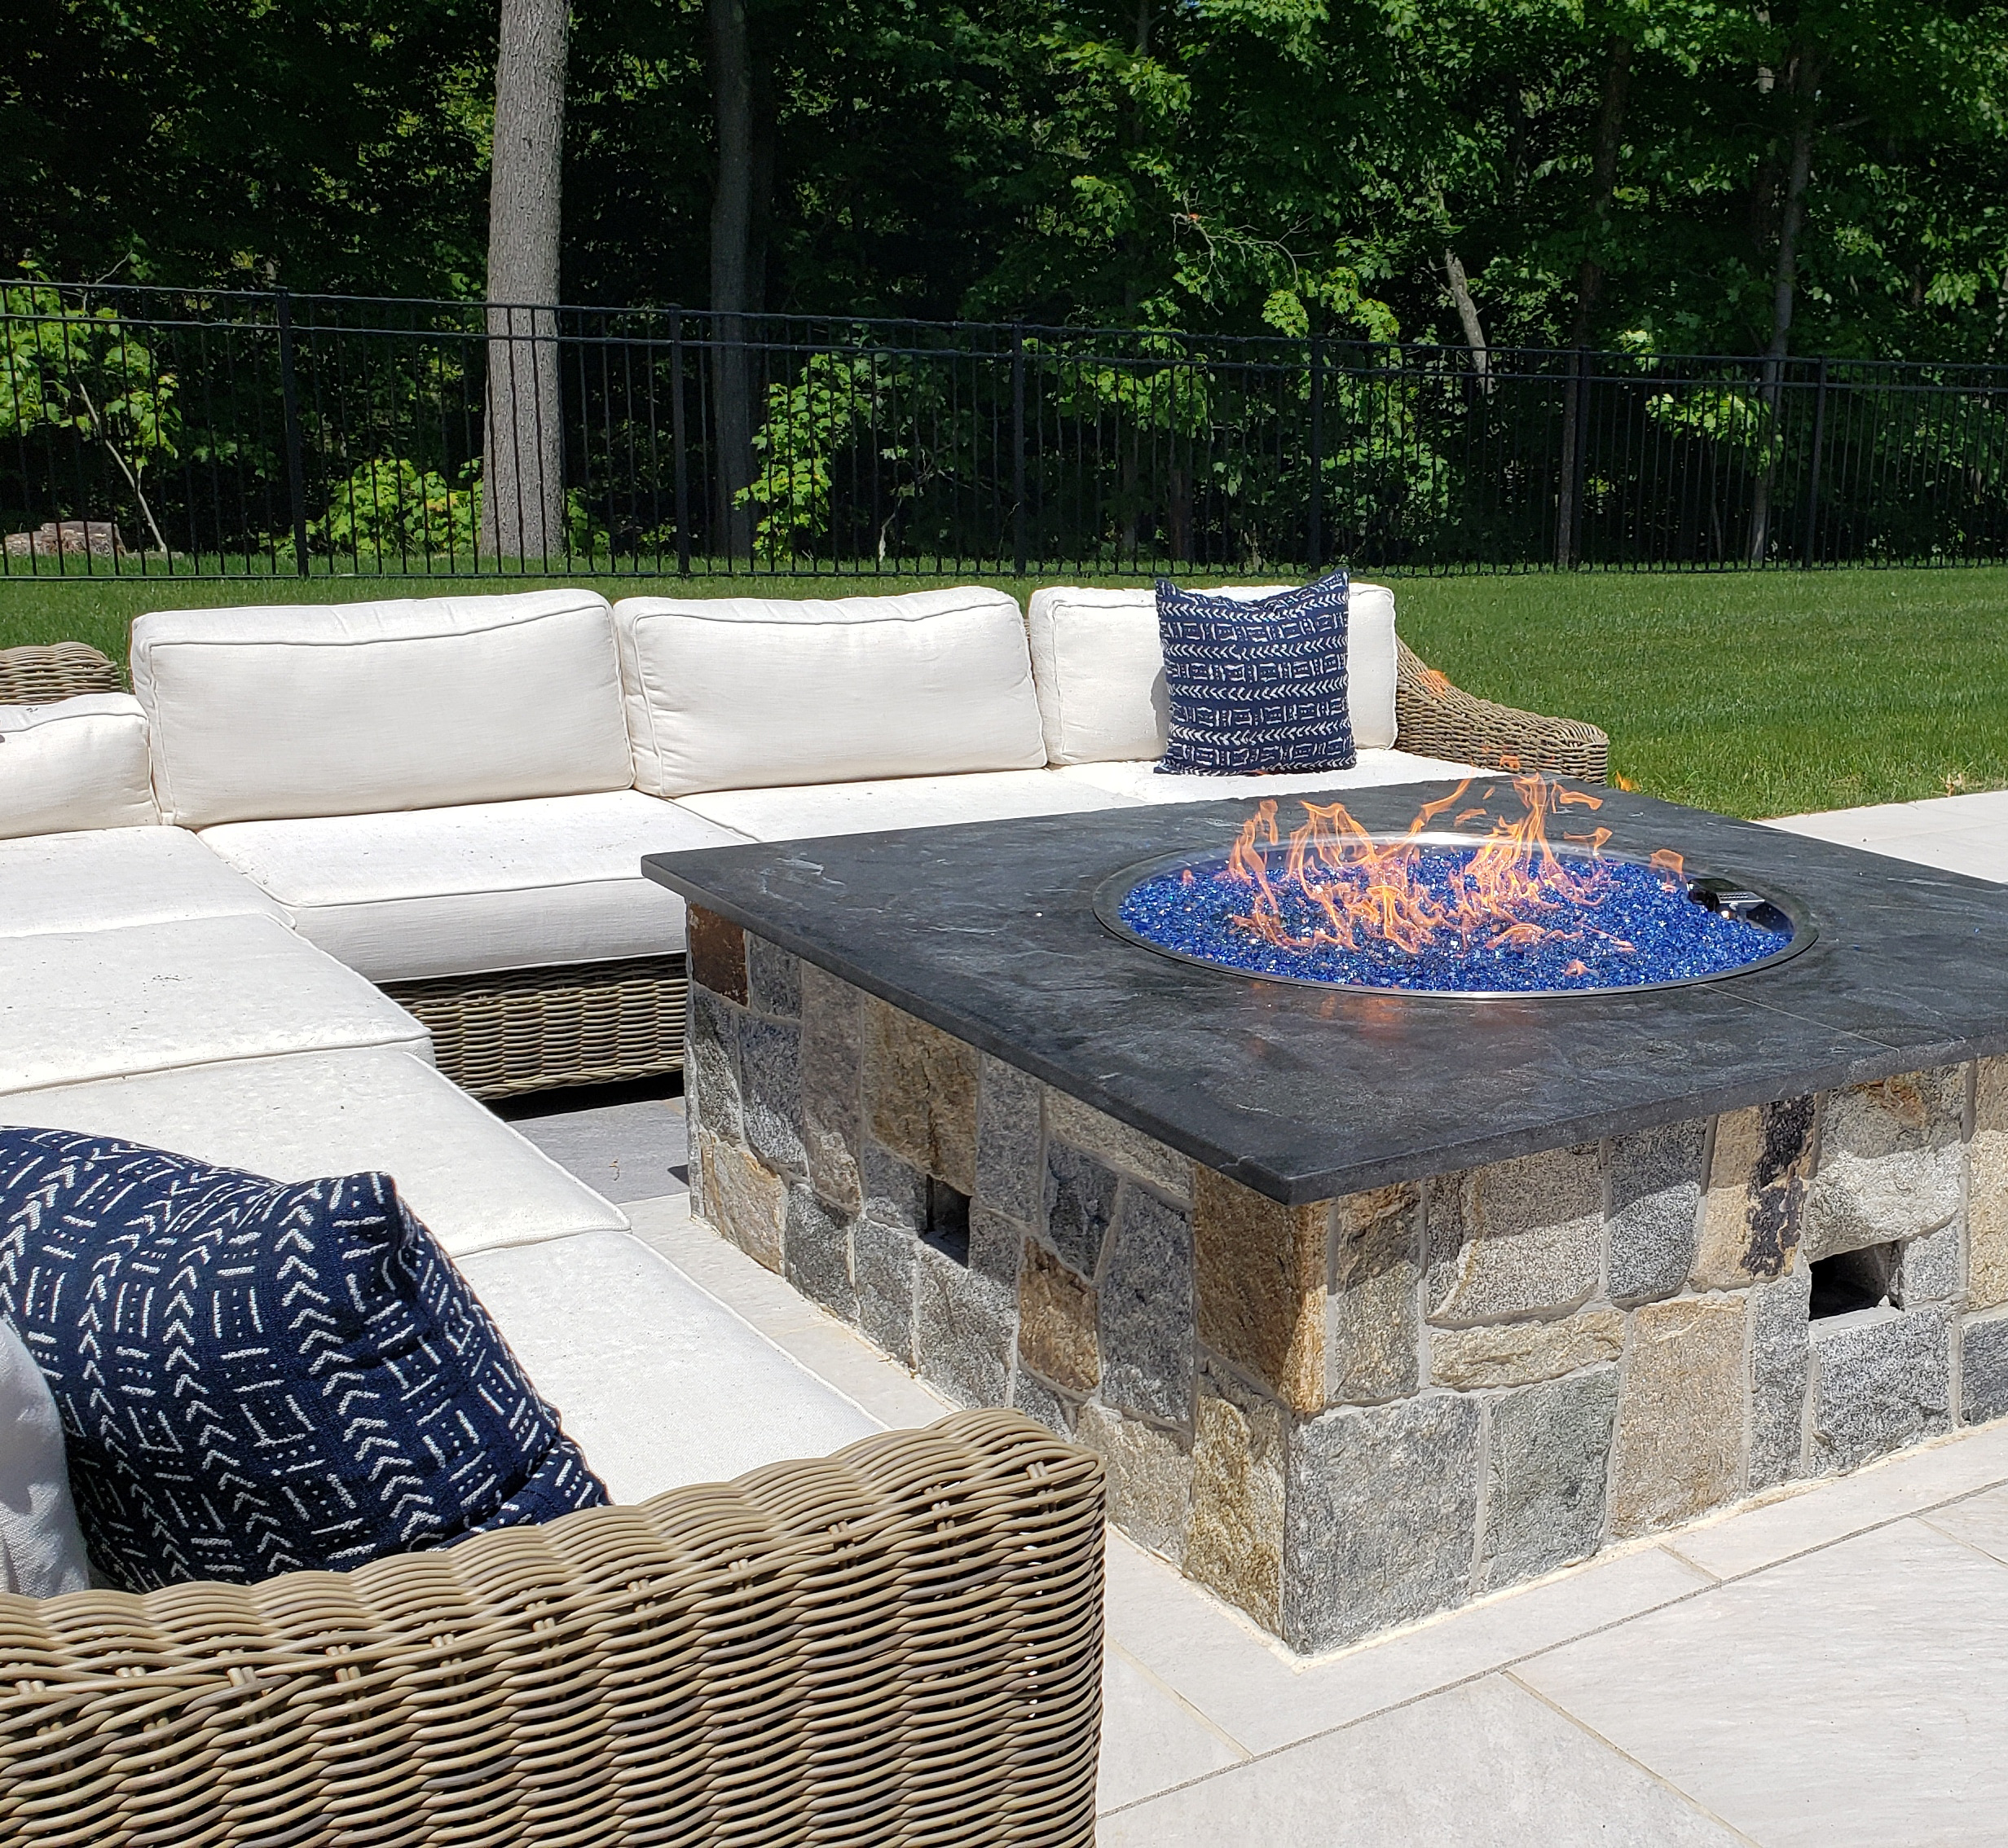 Outdoor firepit by Outdoor Kitchen Design Store. 